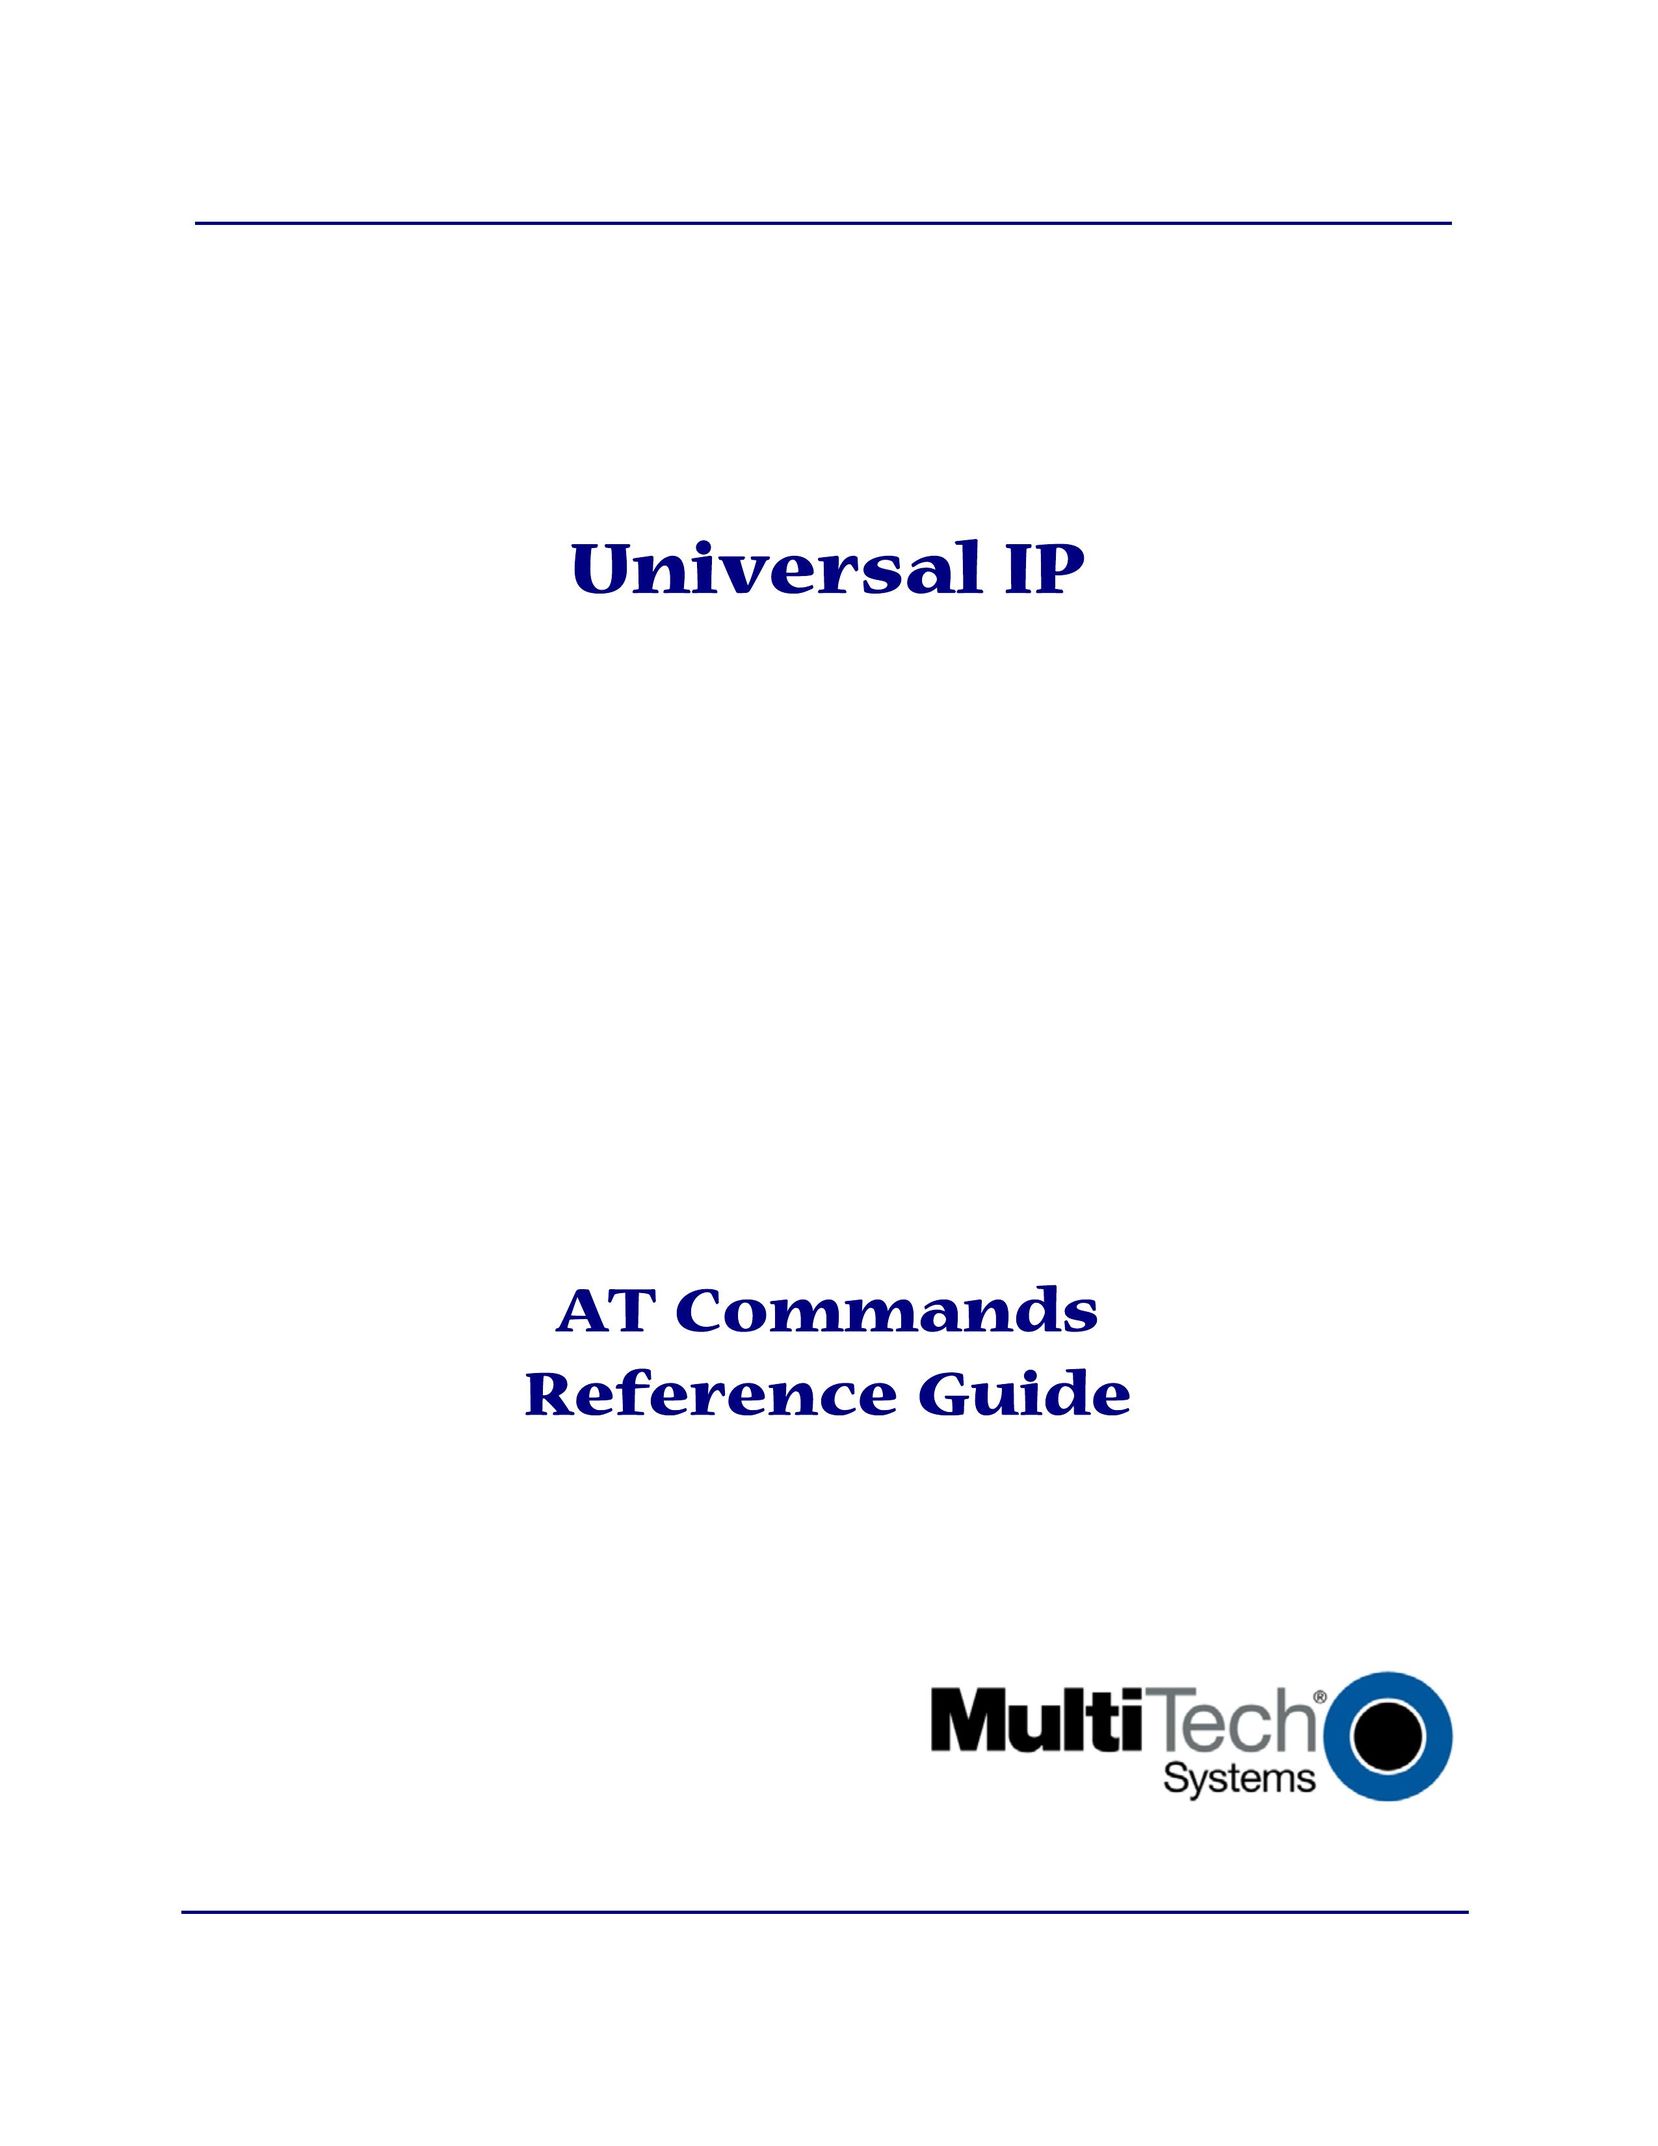 Multi-Tech Systems iCell GPRS (MTSMC-G2-IP Wireless Office Headset User Manual